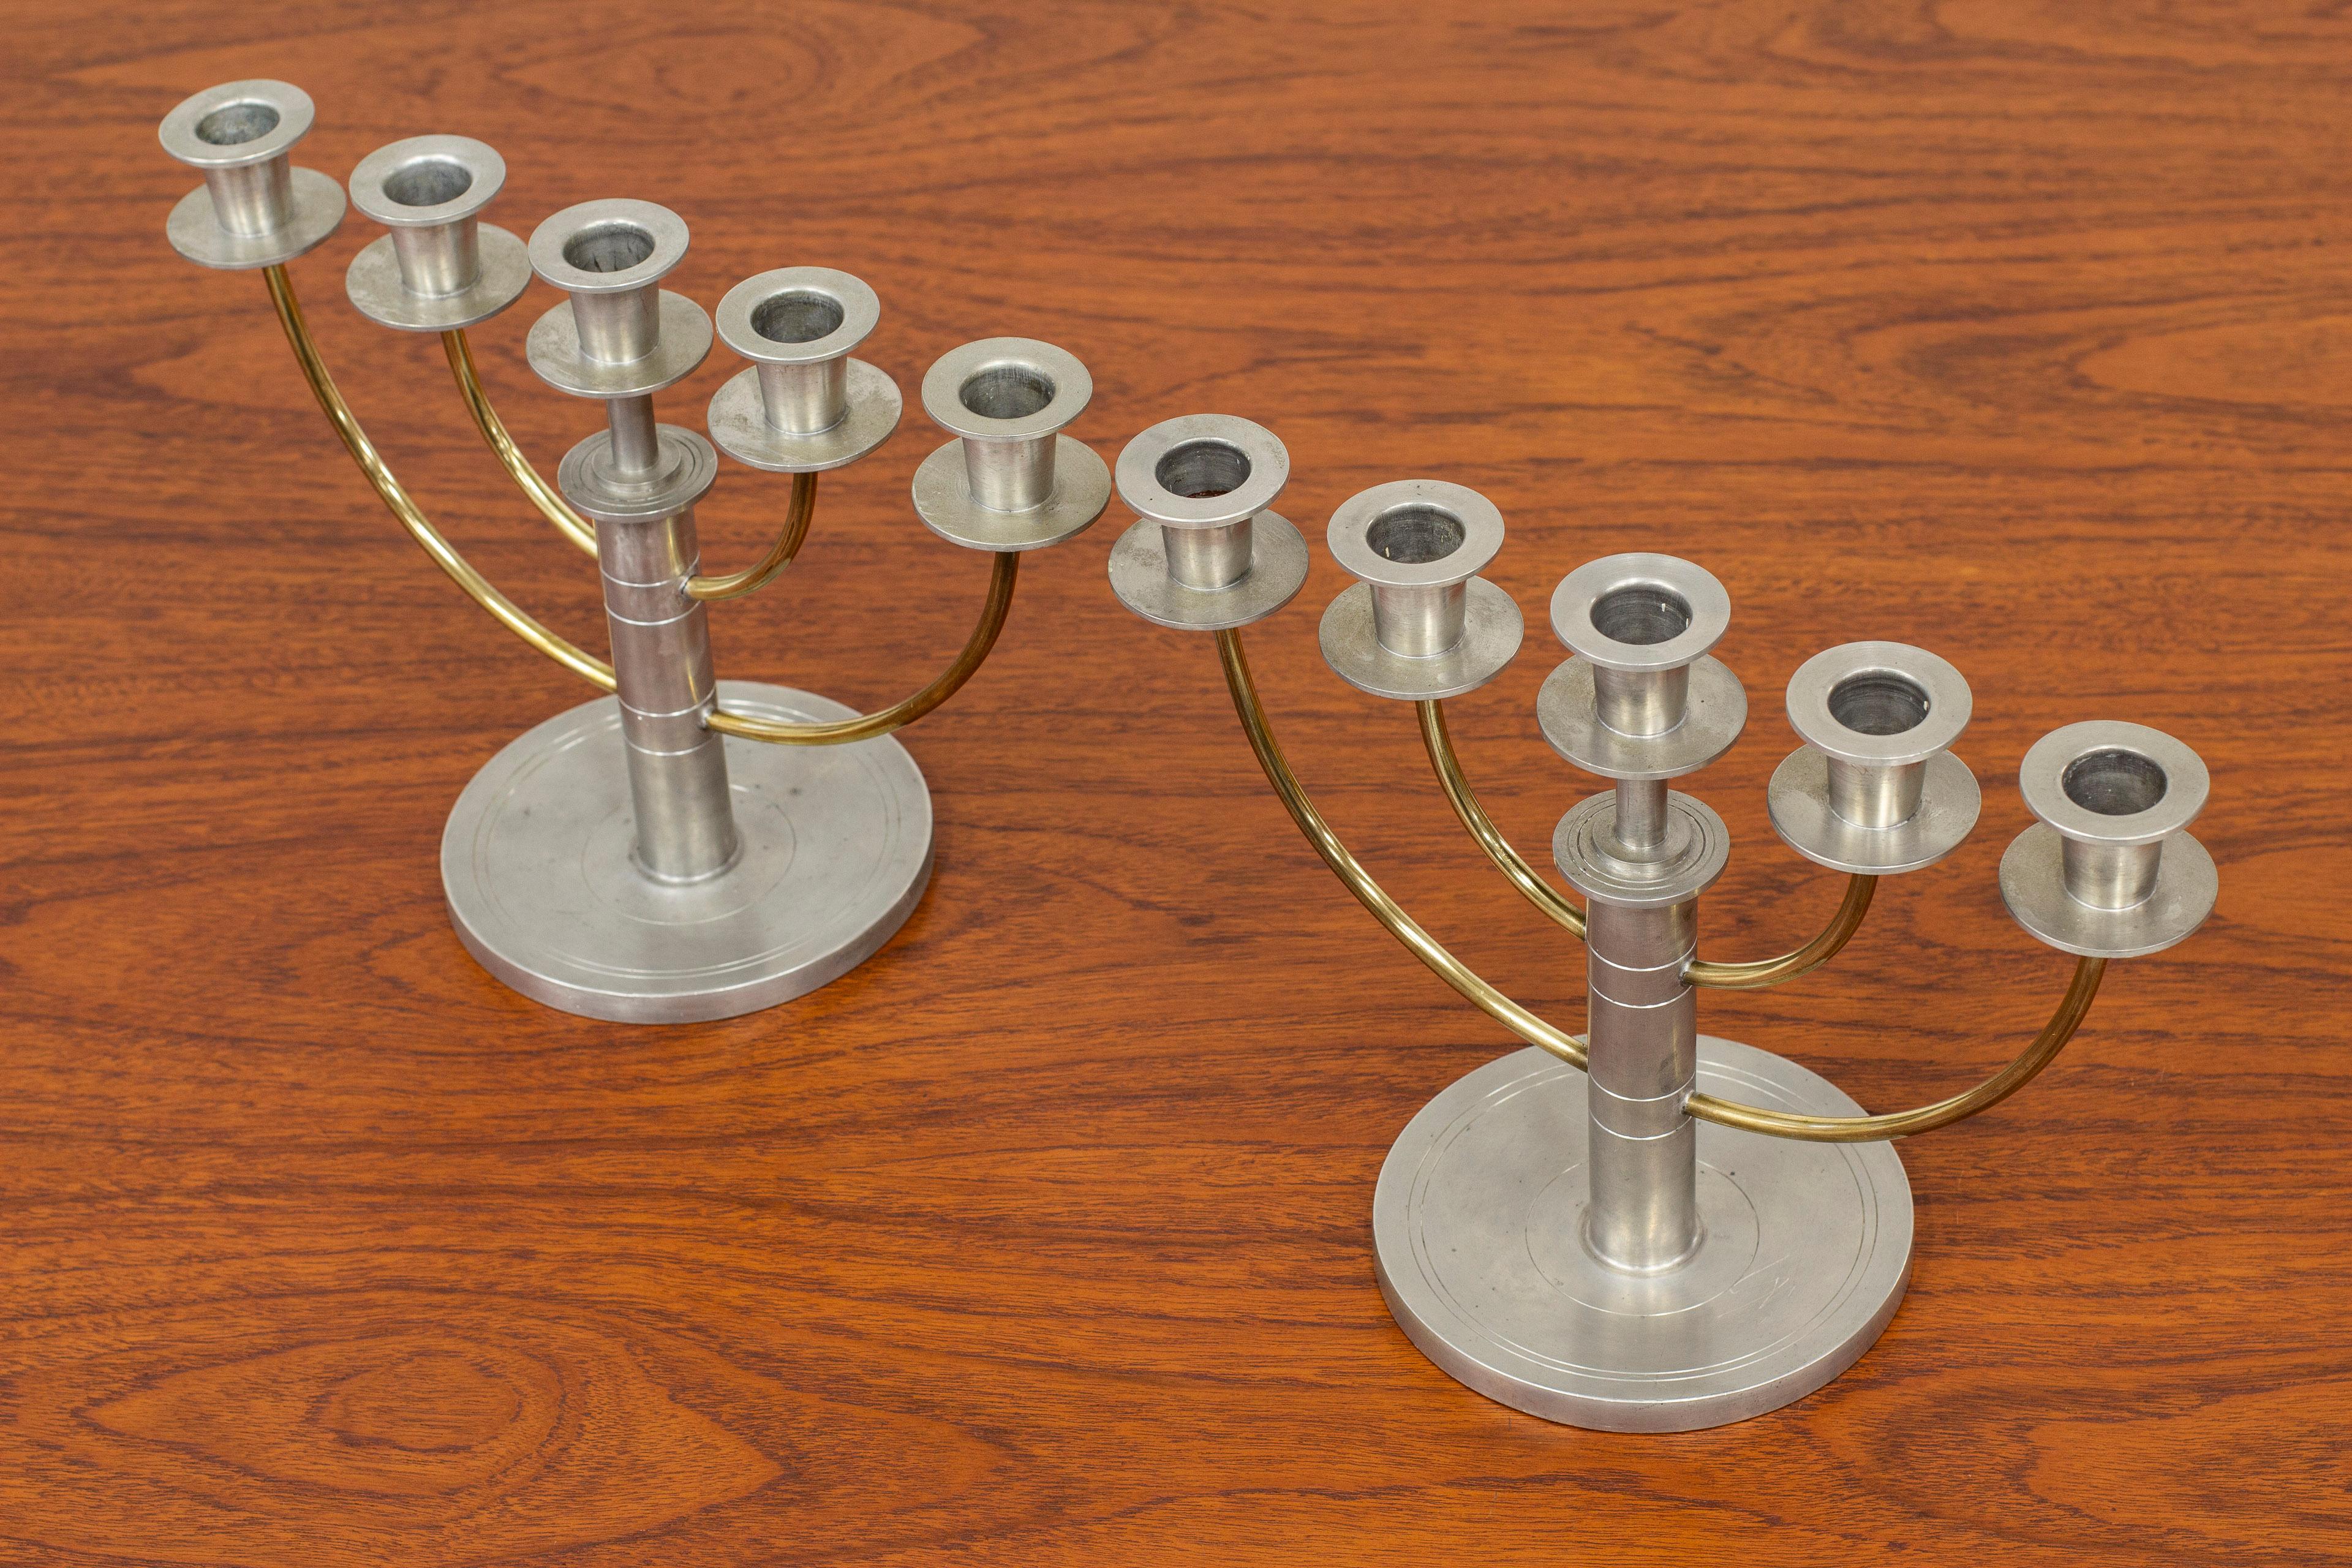 Scandinavian Modern Pair of Candelabras in Pewter and Brass by C.G. Hallberg, Sweden, 1933 For Sale